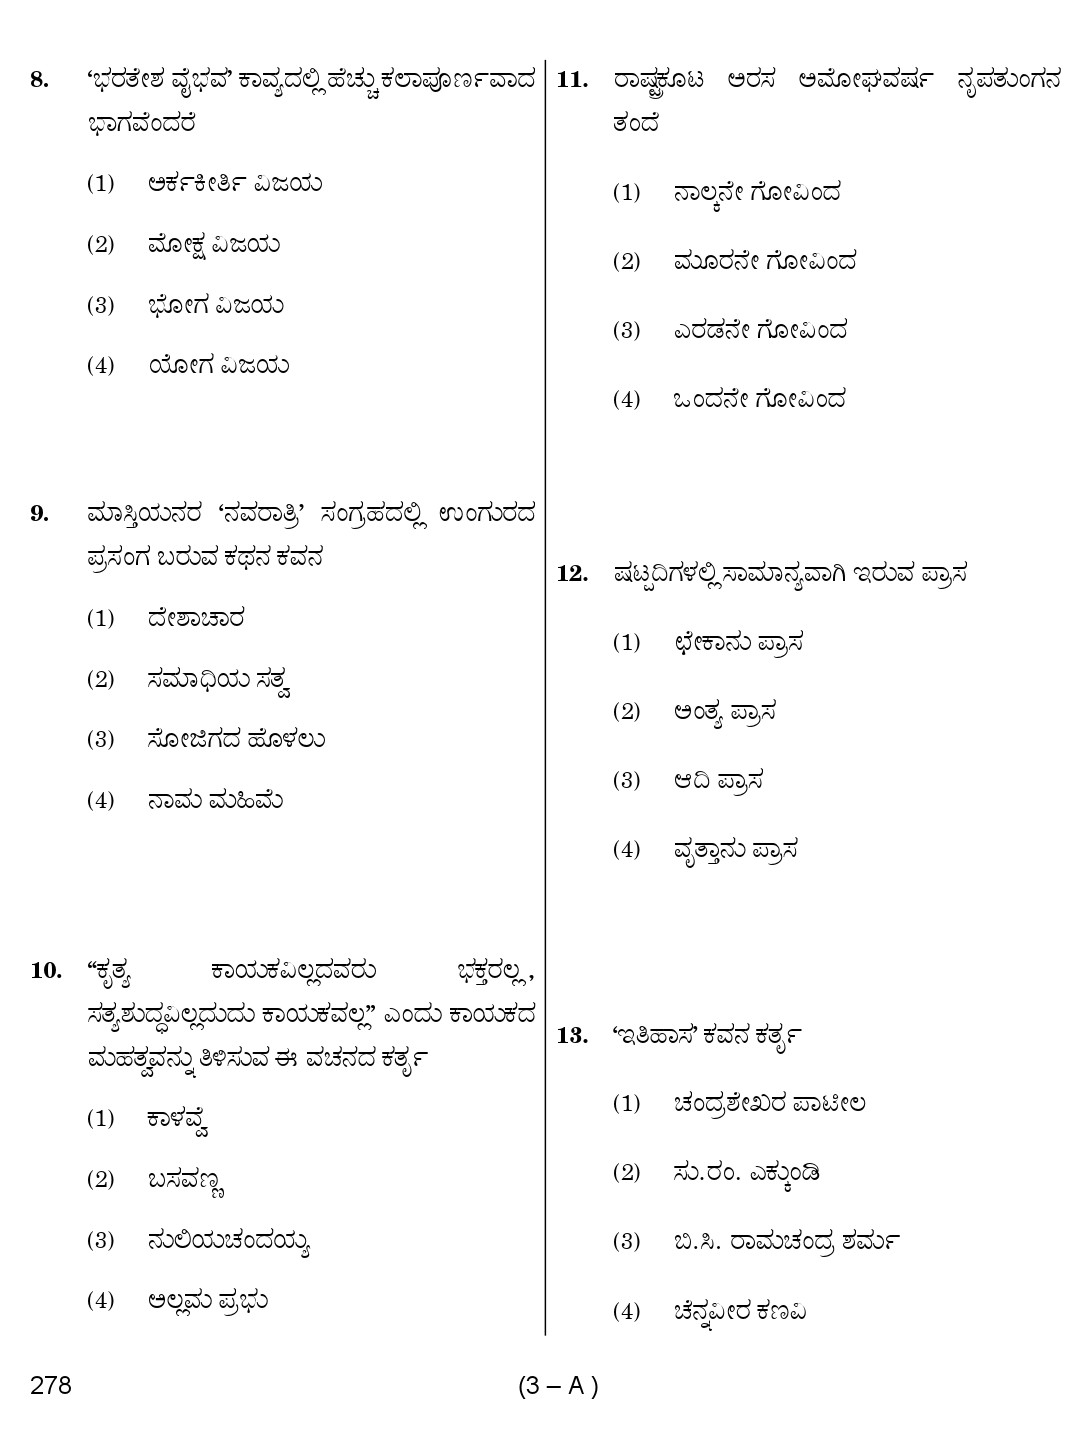 Karnataka PSC First Division Computer Assistants Exam Sample Question Paper 278 3